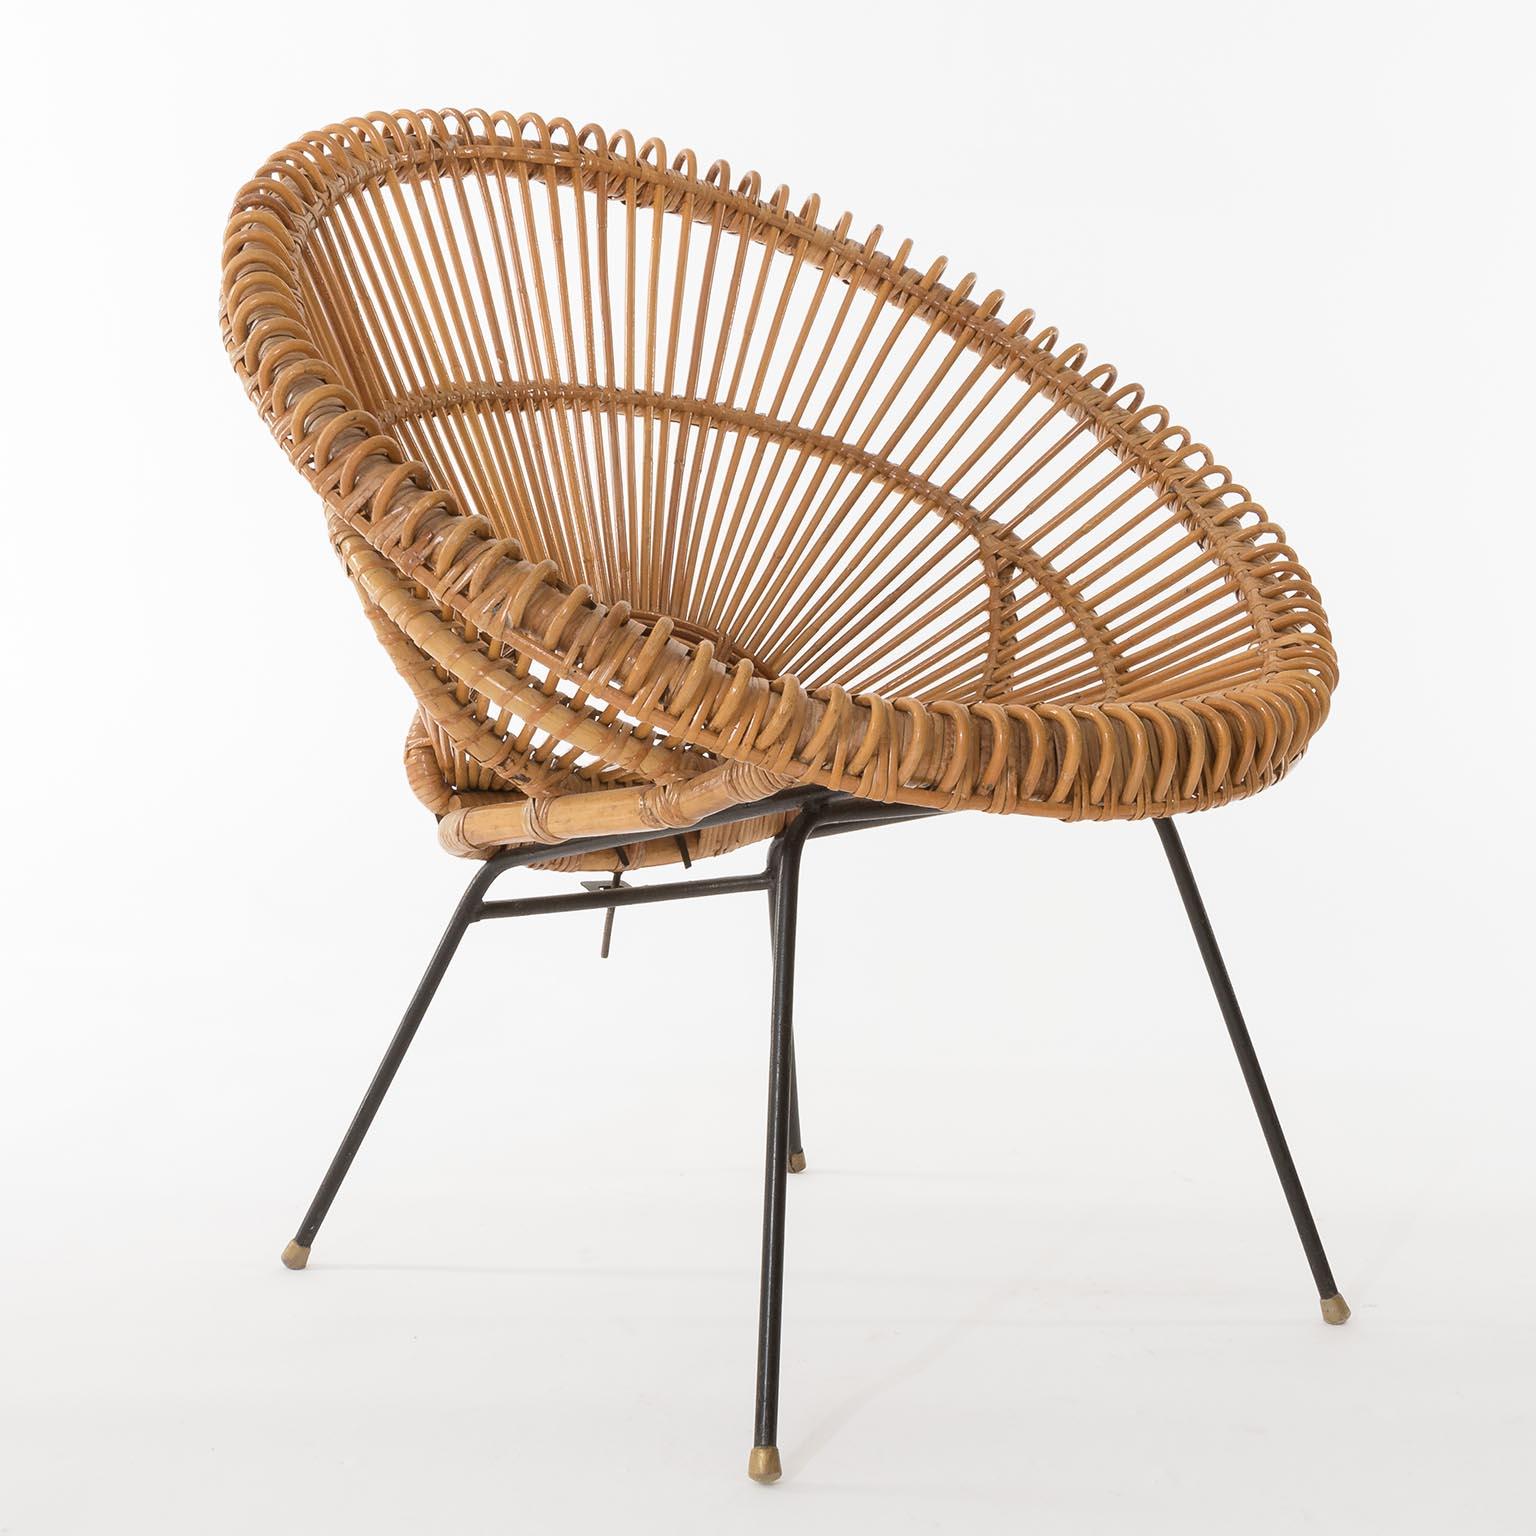 Set Four Mid-Century Modern Rattan Bamboo Chairs, Janine Abraham, Dirk Rol, 1960 For Sale 4